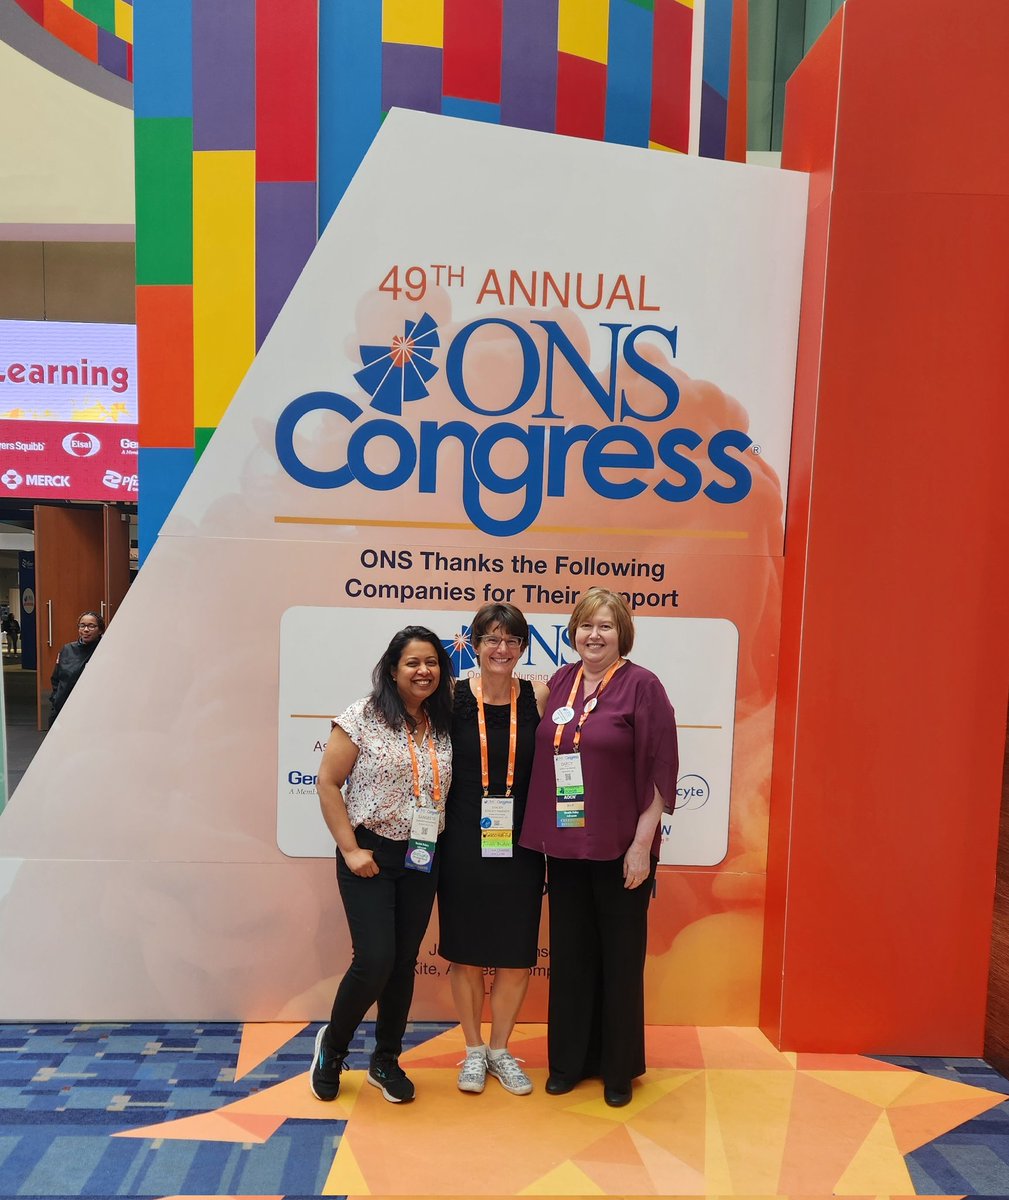 My 1st #ONSCongress was a phenomenal experience 🎉 Met many amazing, empathic, human-centered professionals, but, as it so happens, I already knew (and adore!) these two! Big discussions on #SuppOnc #SurvOnc #HealthEquity #FinancialToxicity #HowMightWe #MakeCancerLessShitty